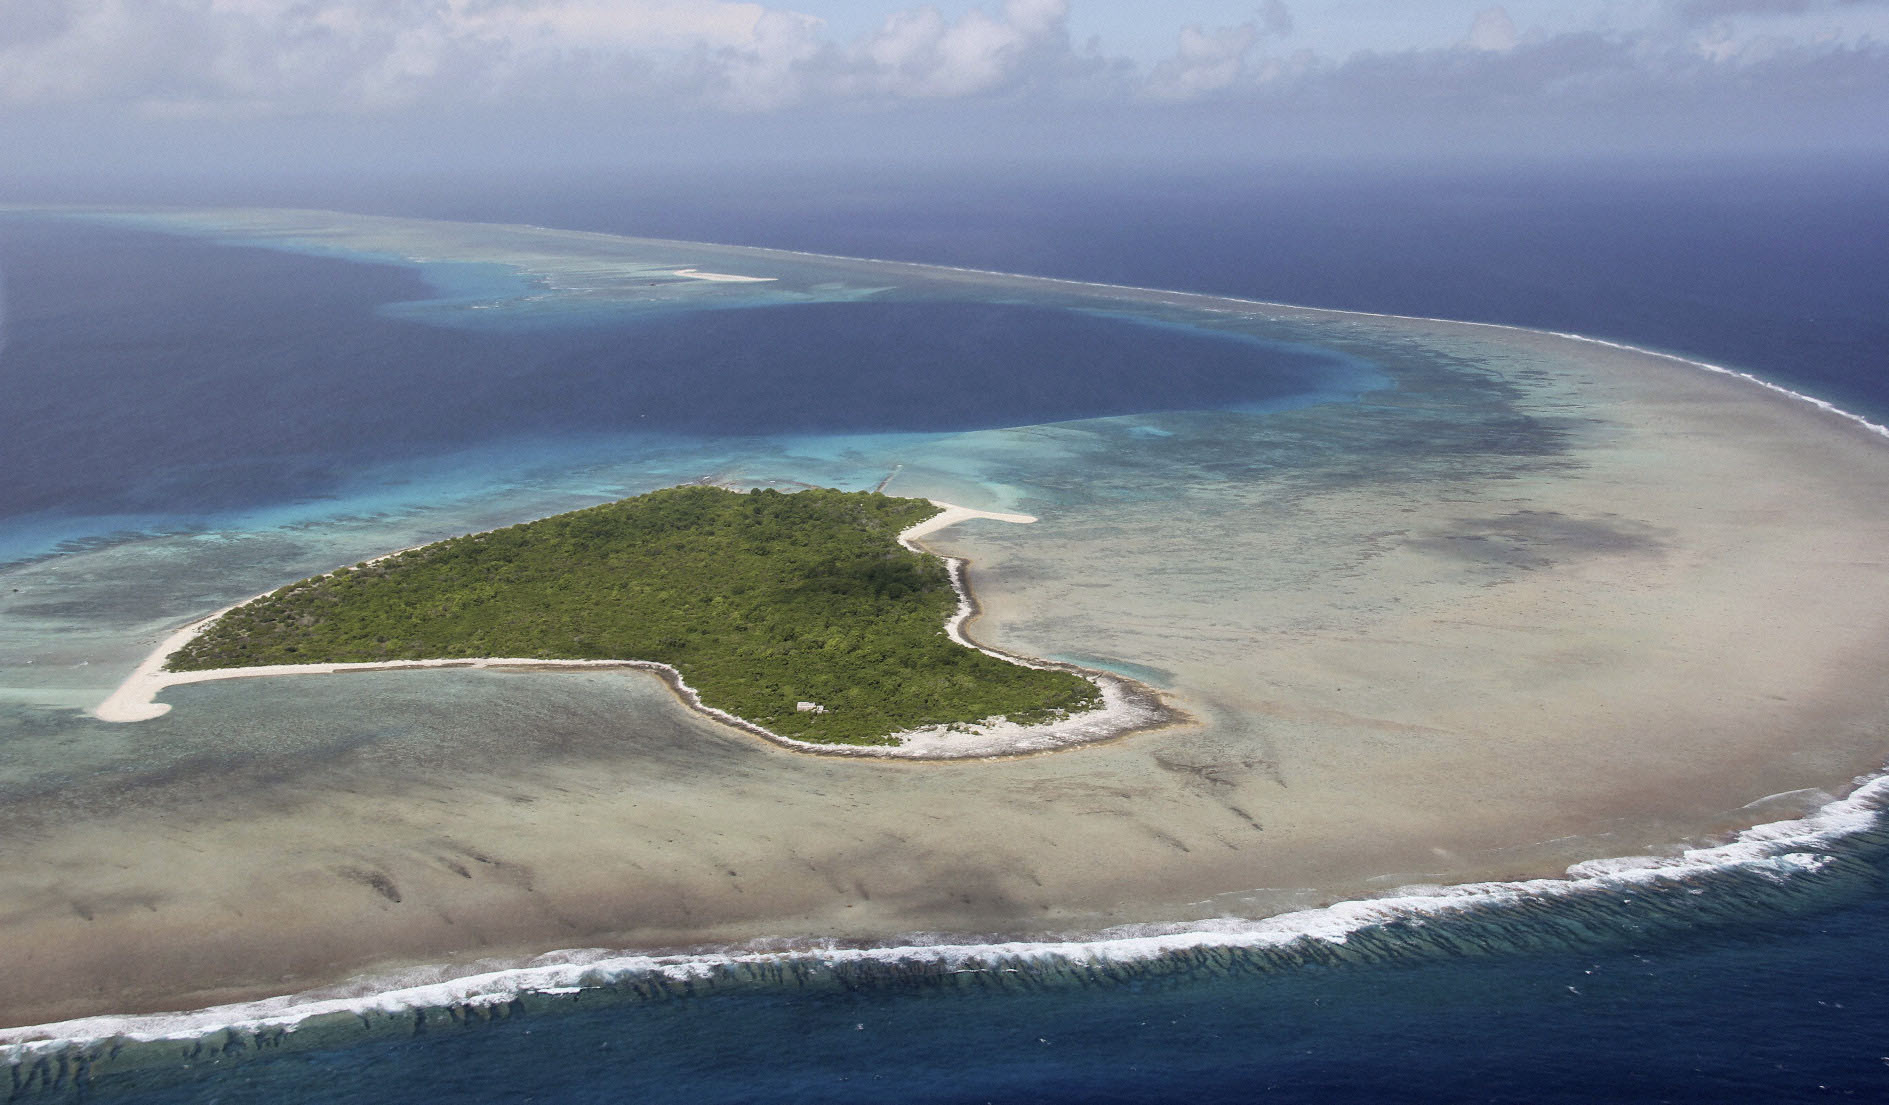 The underwater location maybe based on the real-life Bikini Atoll which was the site for 24 nuclear tests